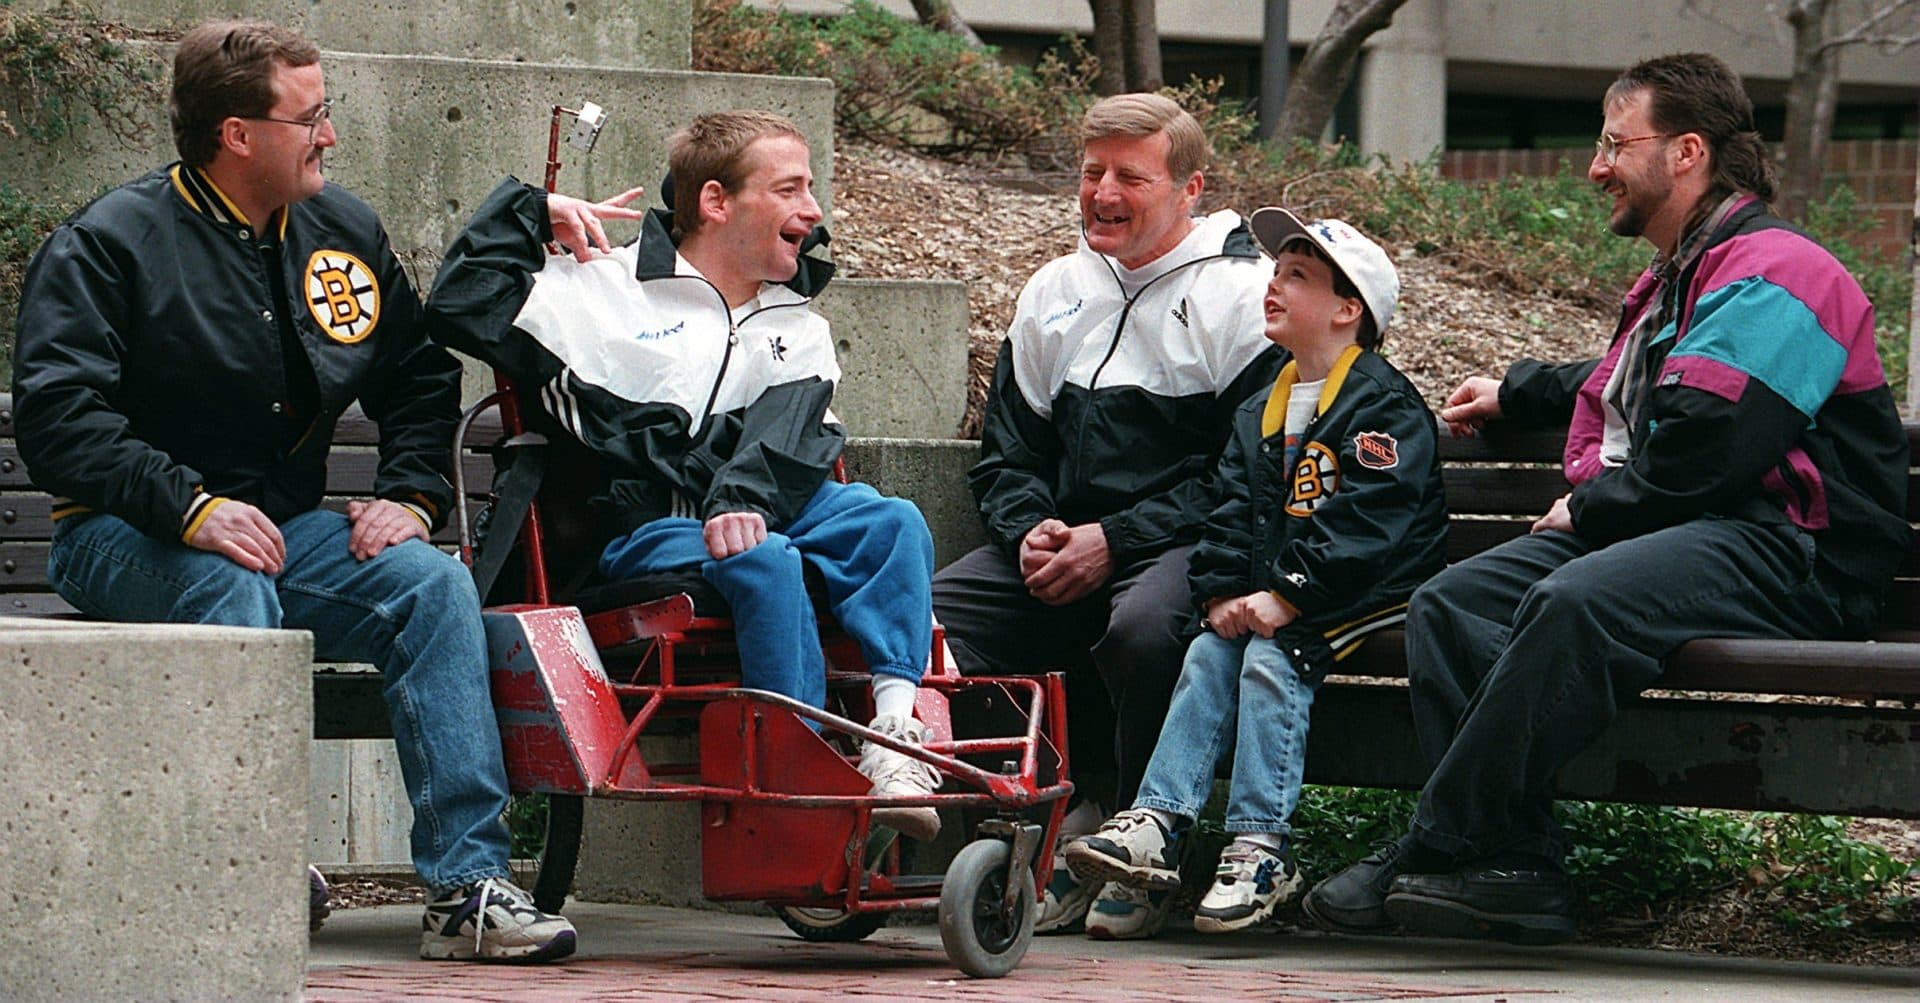 Dick Hoyt with his sons, left to right, Robert, Rick, Russell and grandson Jayme (Robert's son). (Frank O'Brien/The Boston Globe via Getty Images)